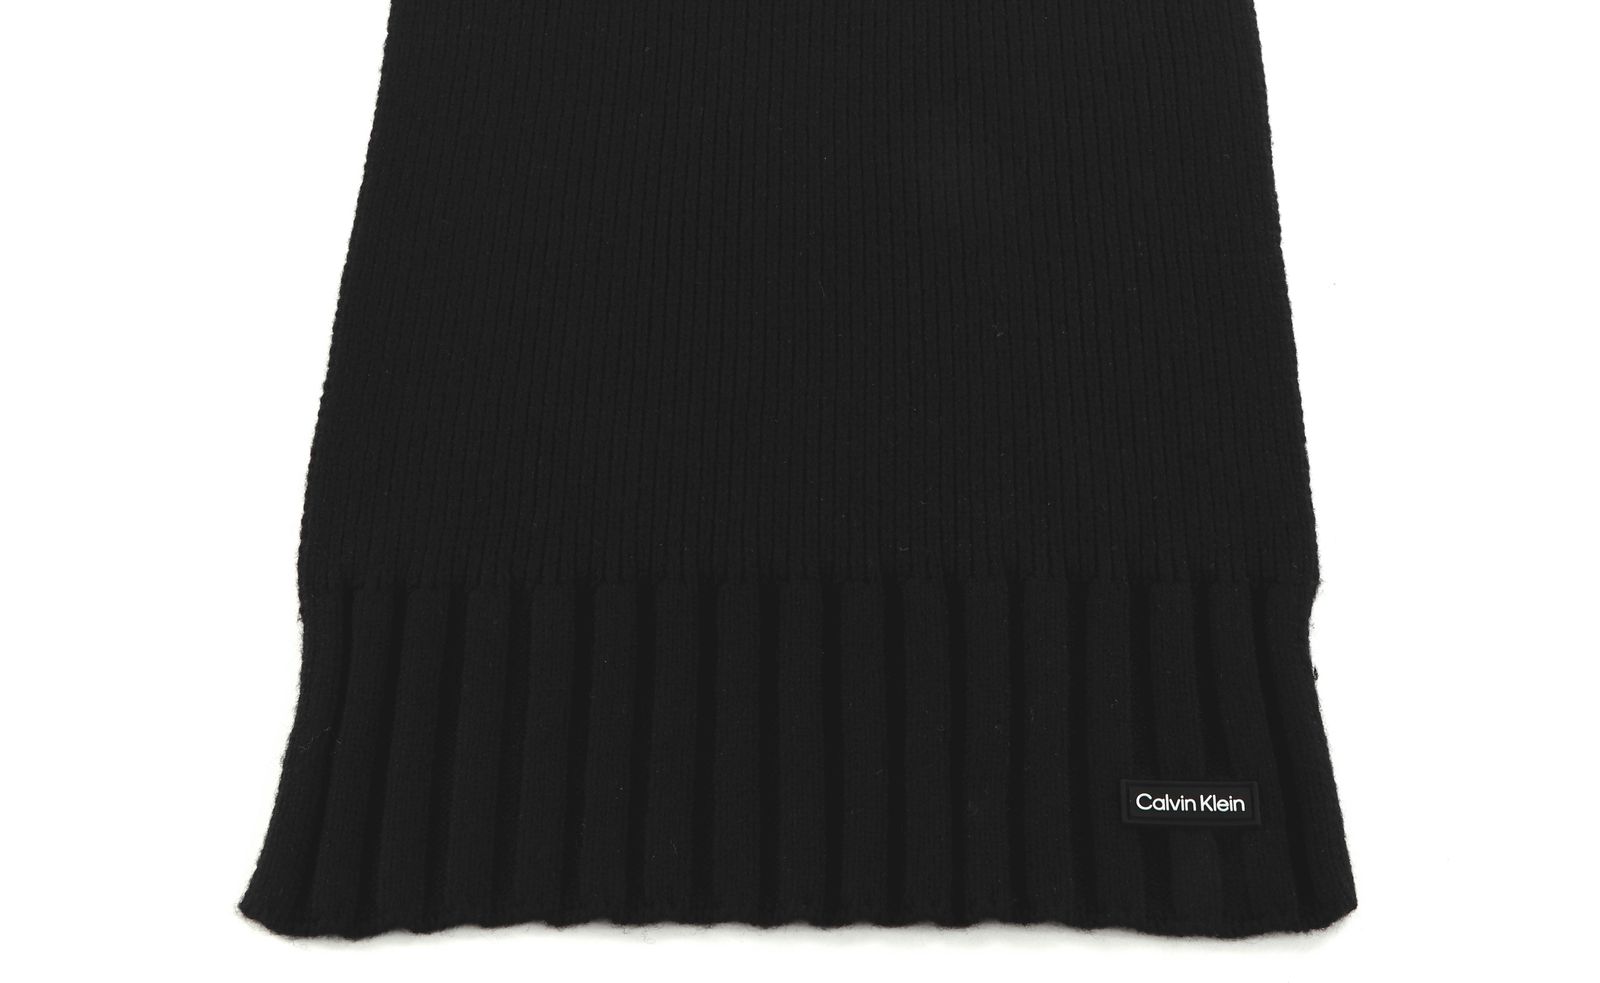 Calvin Klein scarf Elevated Knit Black purses Buy bags, | Scarf accessories | & CK online Rib modeherz